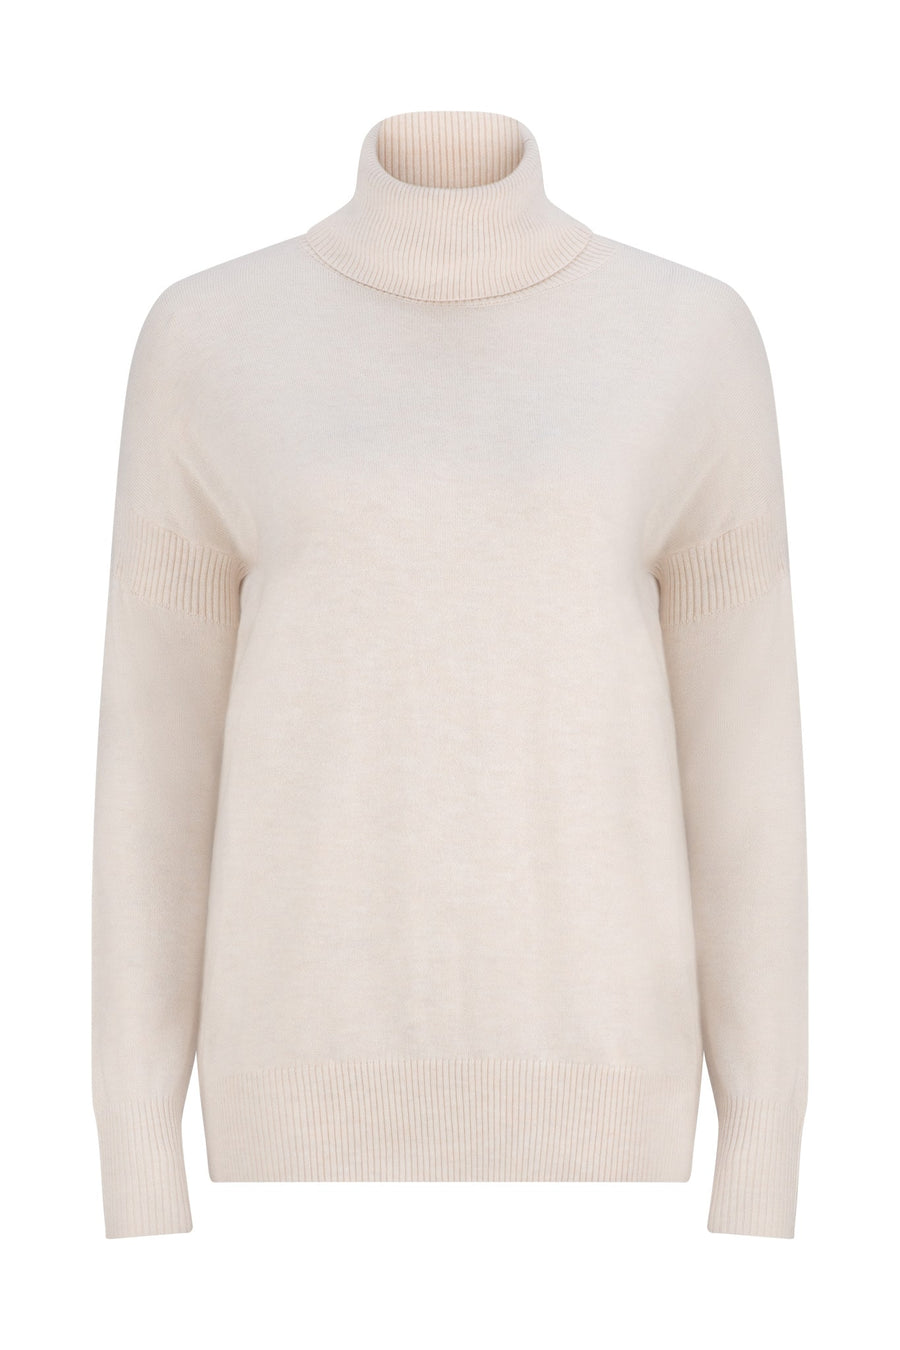 Shop All Ladies Knitwear | Maxted Clothing